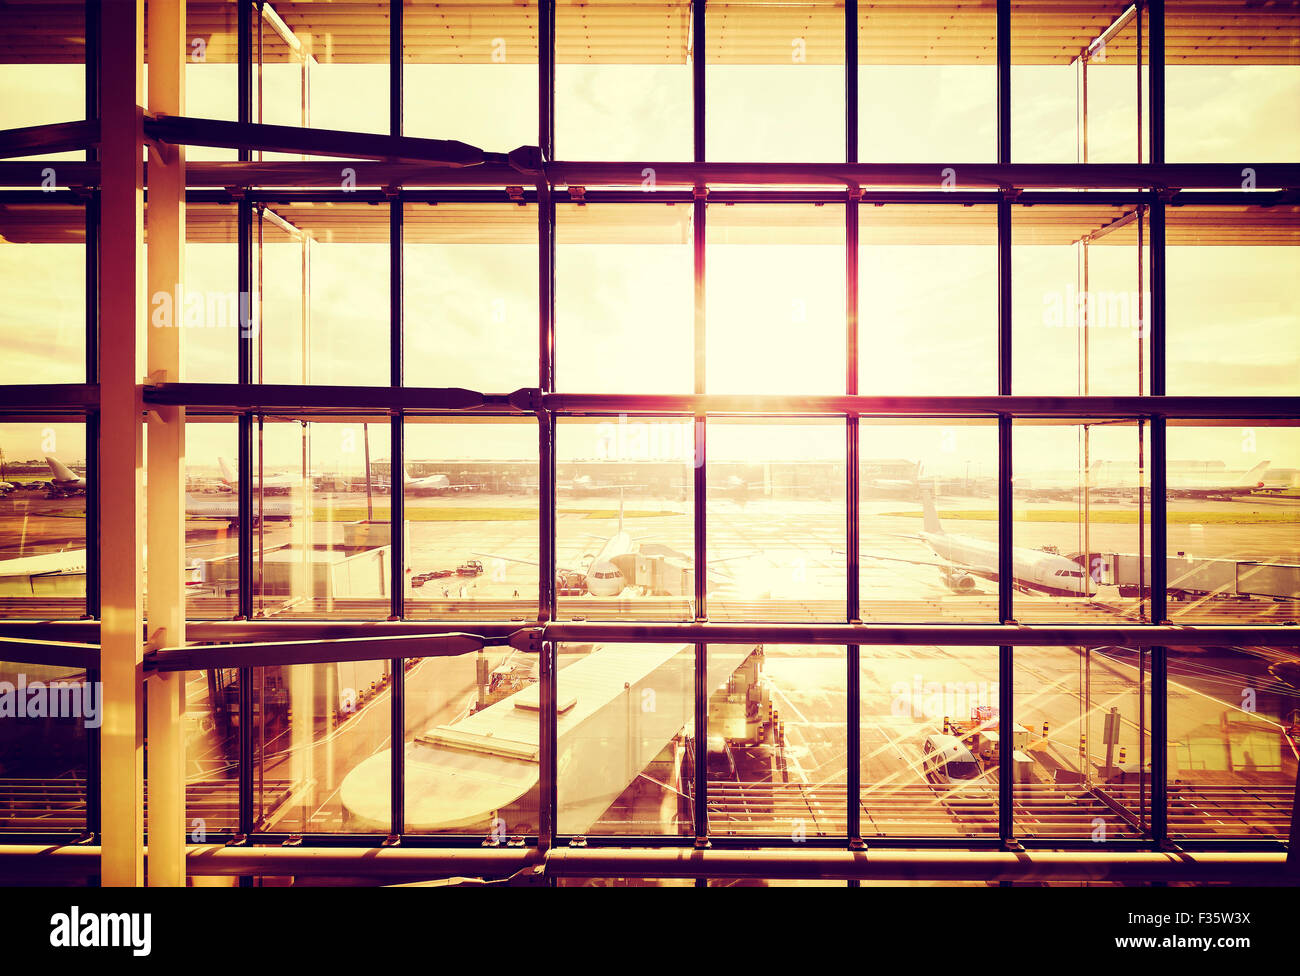 Vintage filtered picture of an airport, transportation and business travel concept. Stock Photo